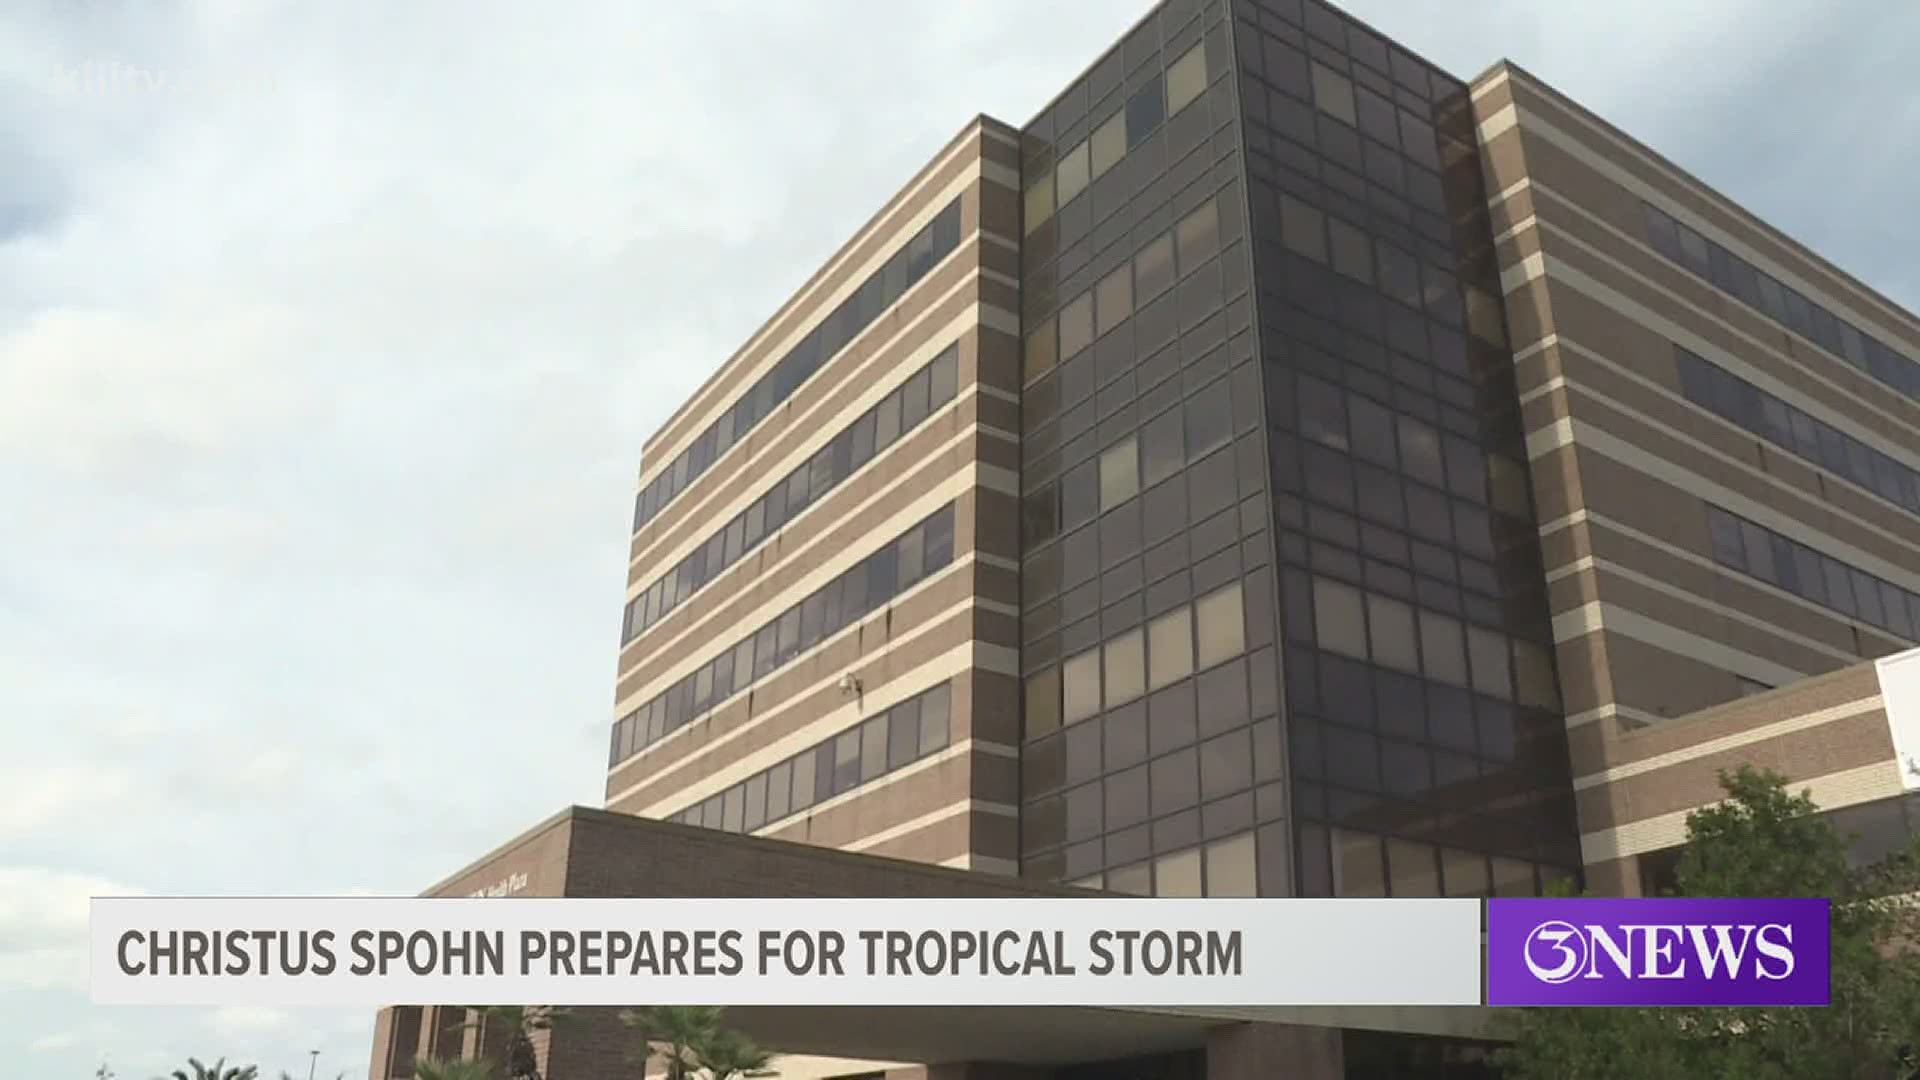 Officials with the health system say the storm adds more risk to vulnerable patients.